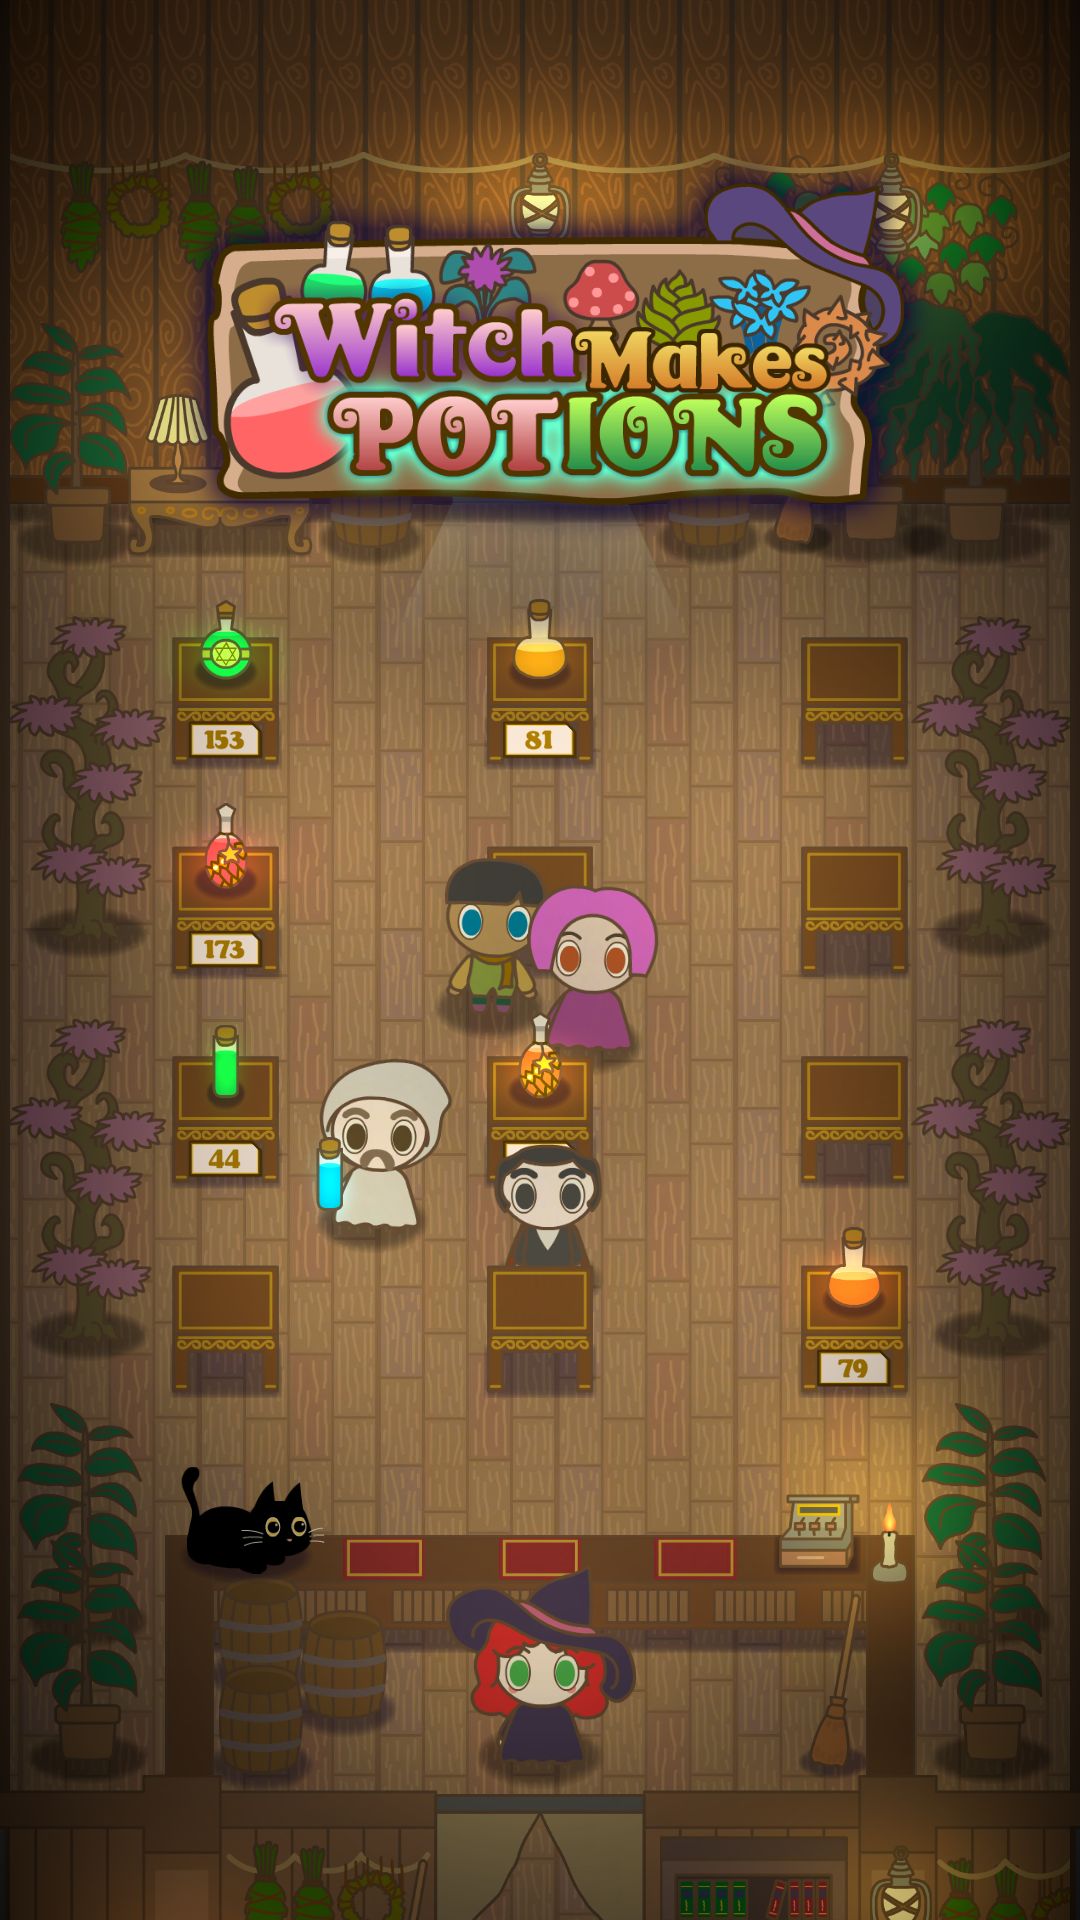 Download Witch Makes Potions für Android kostenlos.